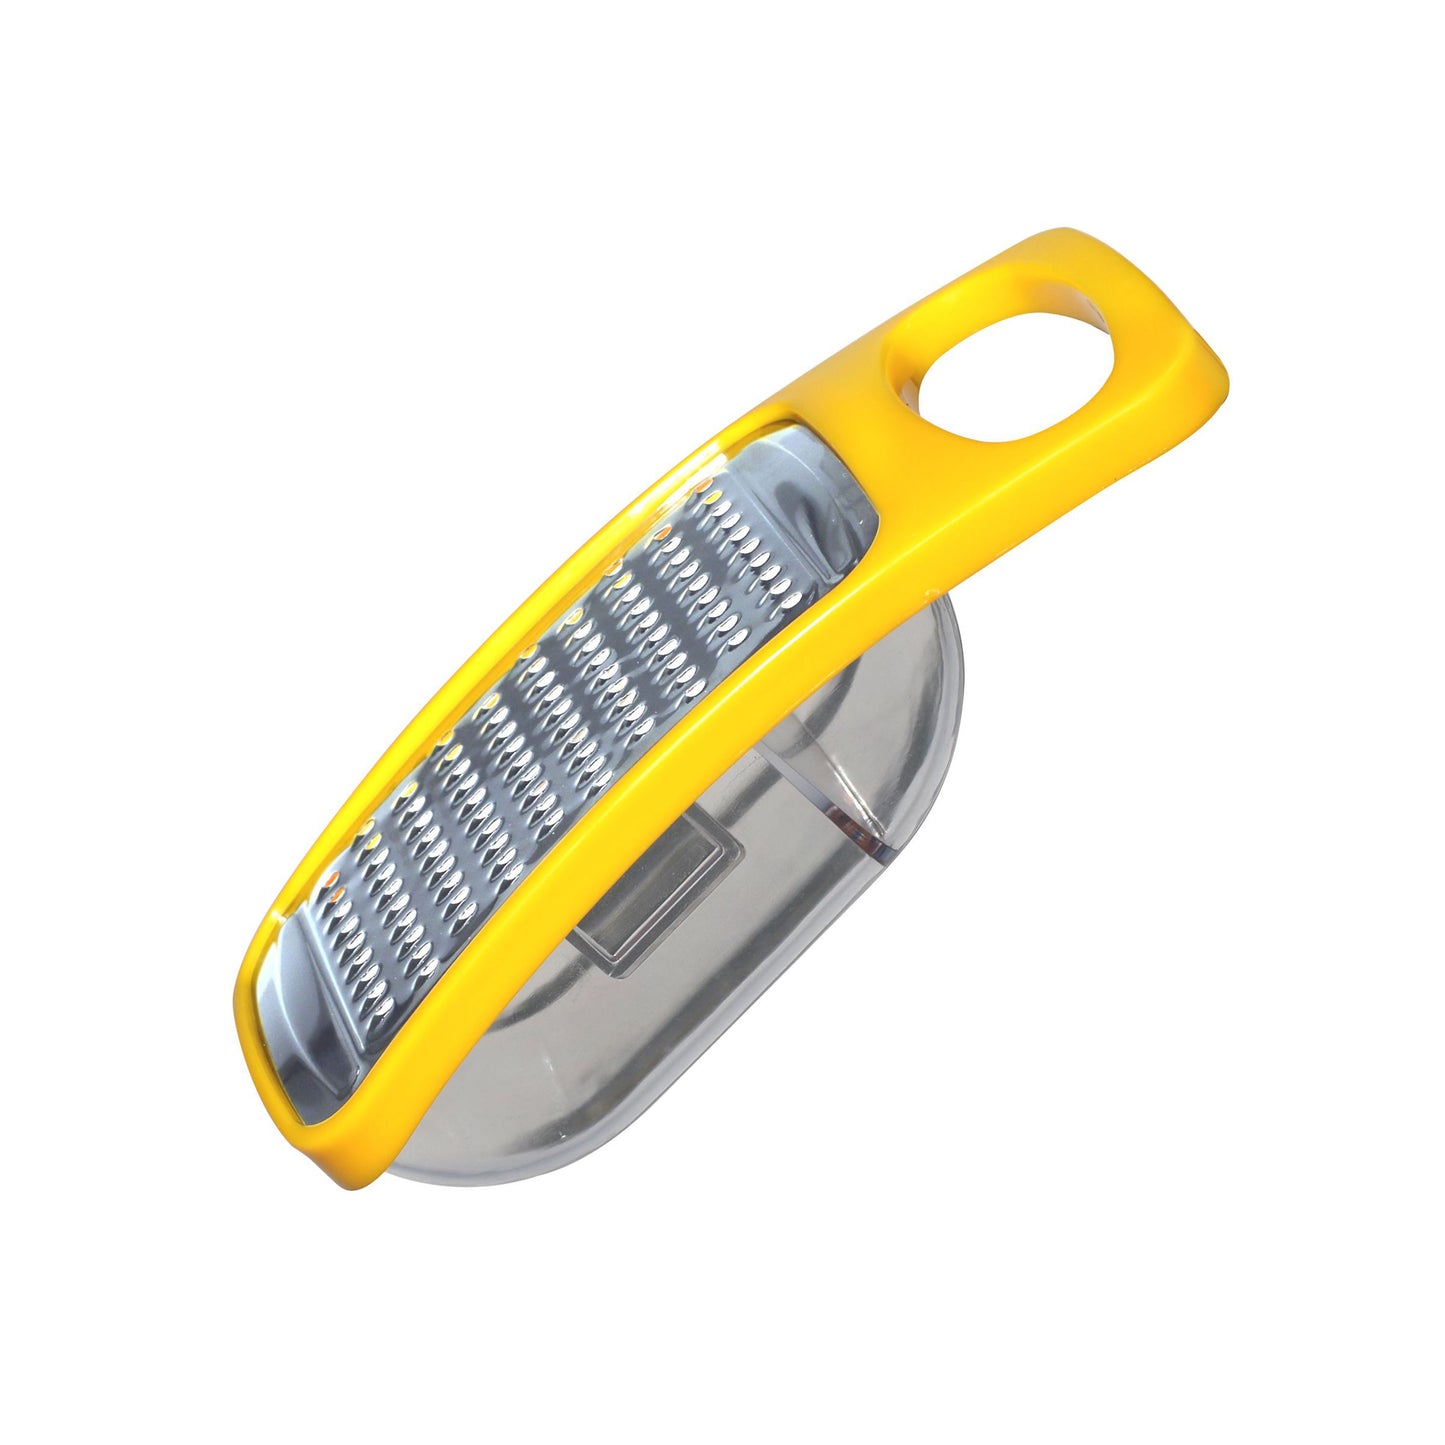 Classy Touch - Grater Stainless Steel With ABS Plastic Handel Grater Yellow - Ghar Sajawat